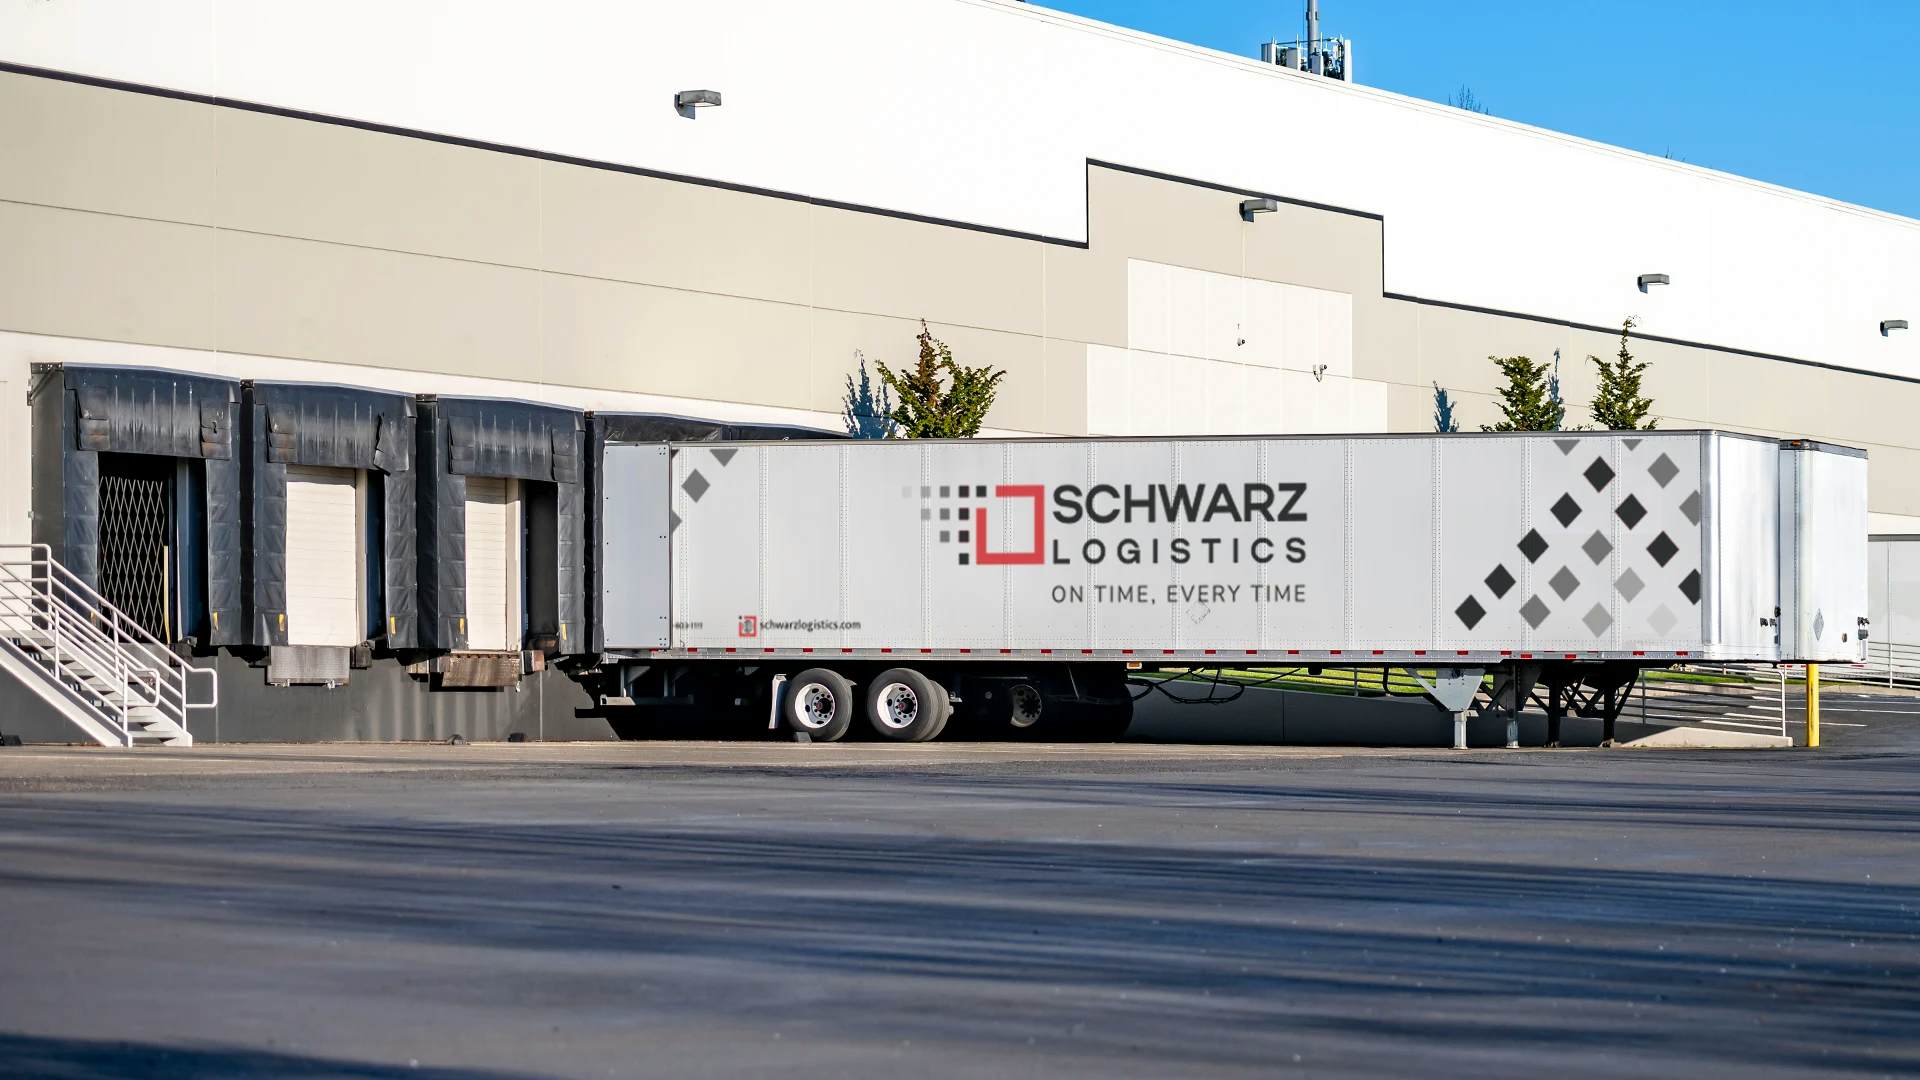 A large, white commercial building with multiple loading docks. Parked at one of the docks is a long white semi-trailer with the logo "SCHWARZ LOGISTICS" on its side, signifying that the facility is likely used for the distribution of goods. The trailer is backed into the dock, and loading dock doors are covered by black flexible curtains to seal the space between the dock and the trailer, indicating that loading or unloading activities may be taking place.